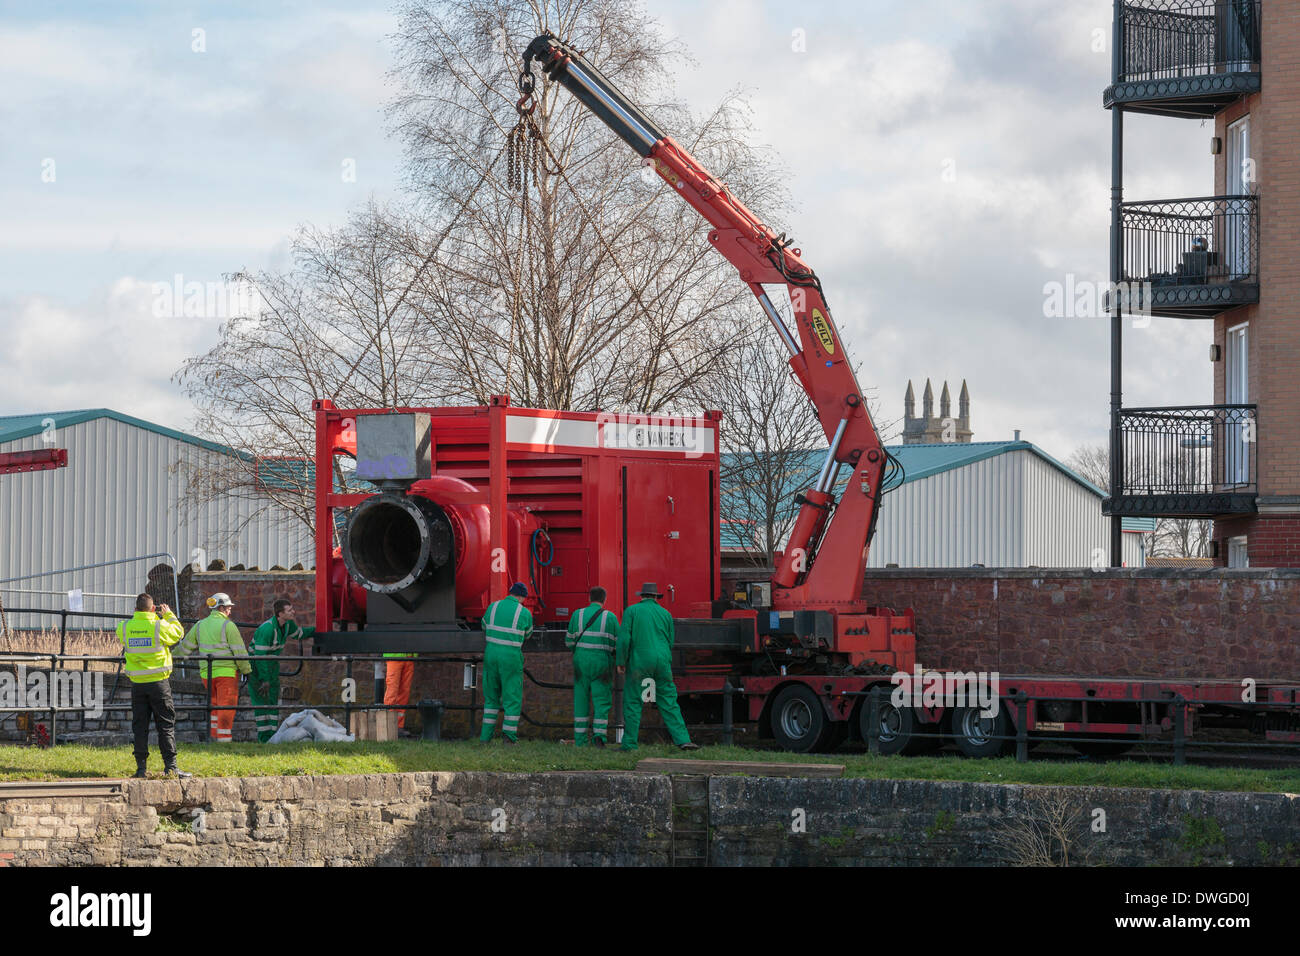 Bridgwater Docks, Somerset, UK . 07th Mar, 2014. Dutch Vanheck pump being dismantled and loaded onto a waiting lorry for its return trip back to Holland on Friday 7th March, 2014 at Bridgwater Docks. The high capacity pump was installed by the Environment Agency in mid February as a precaution to pump water back into the River Parrett to prevent the Bridgwater canal from overtopping. This follows the worst floods on the Somerset Levels in living history. Credit:  Nick Cable/Alamy Live News Stock Photo